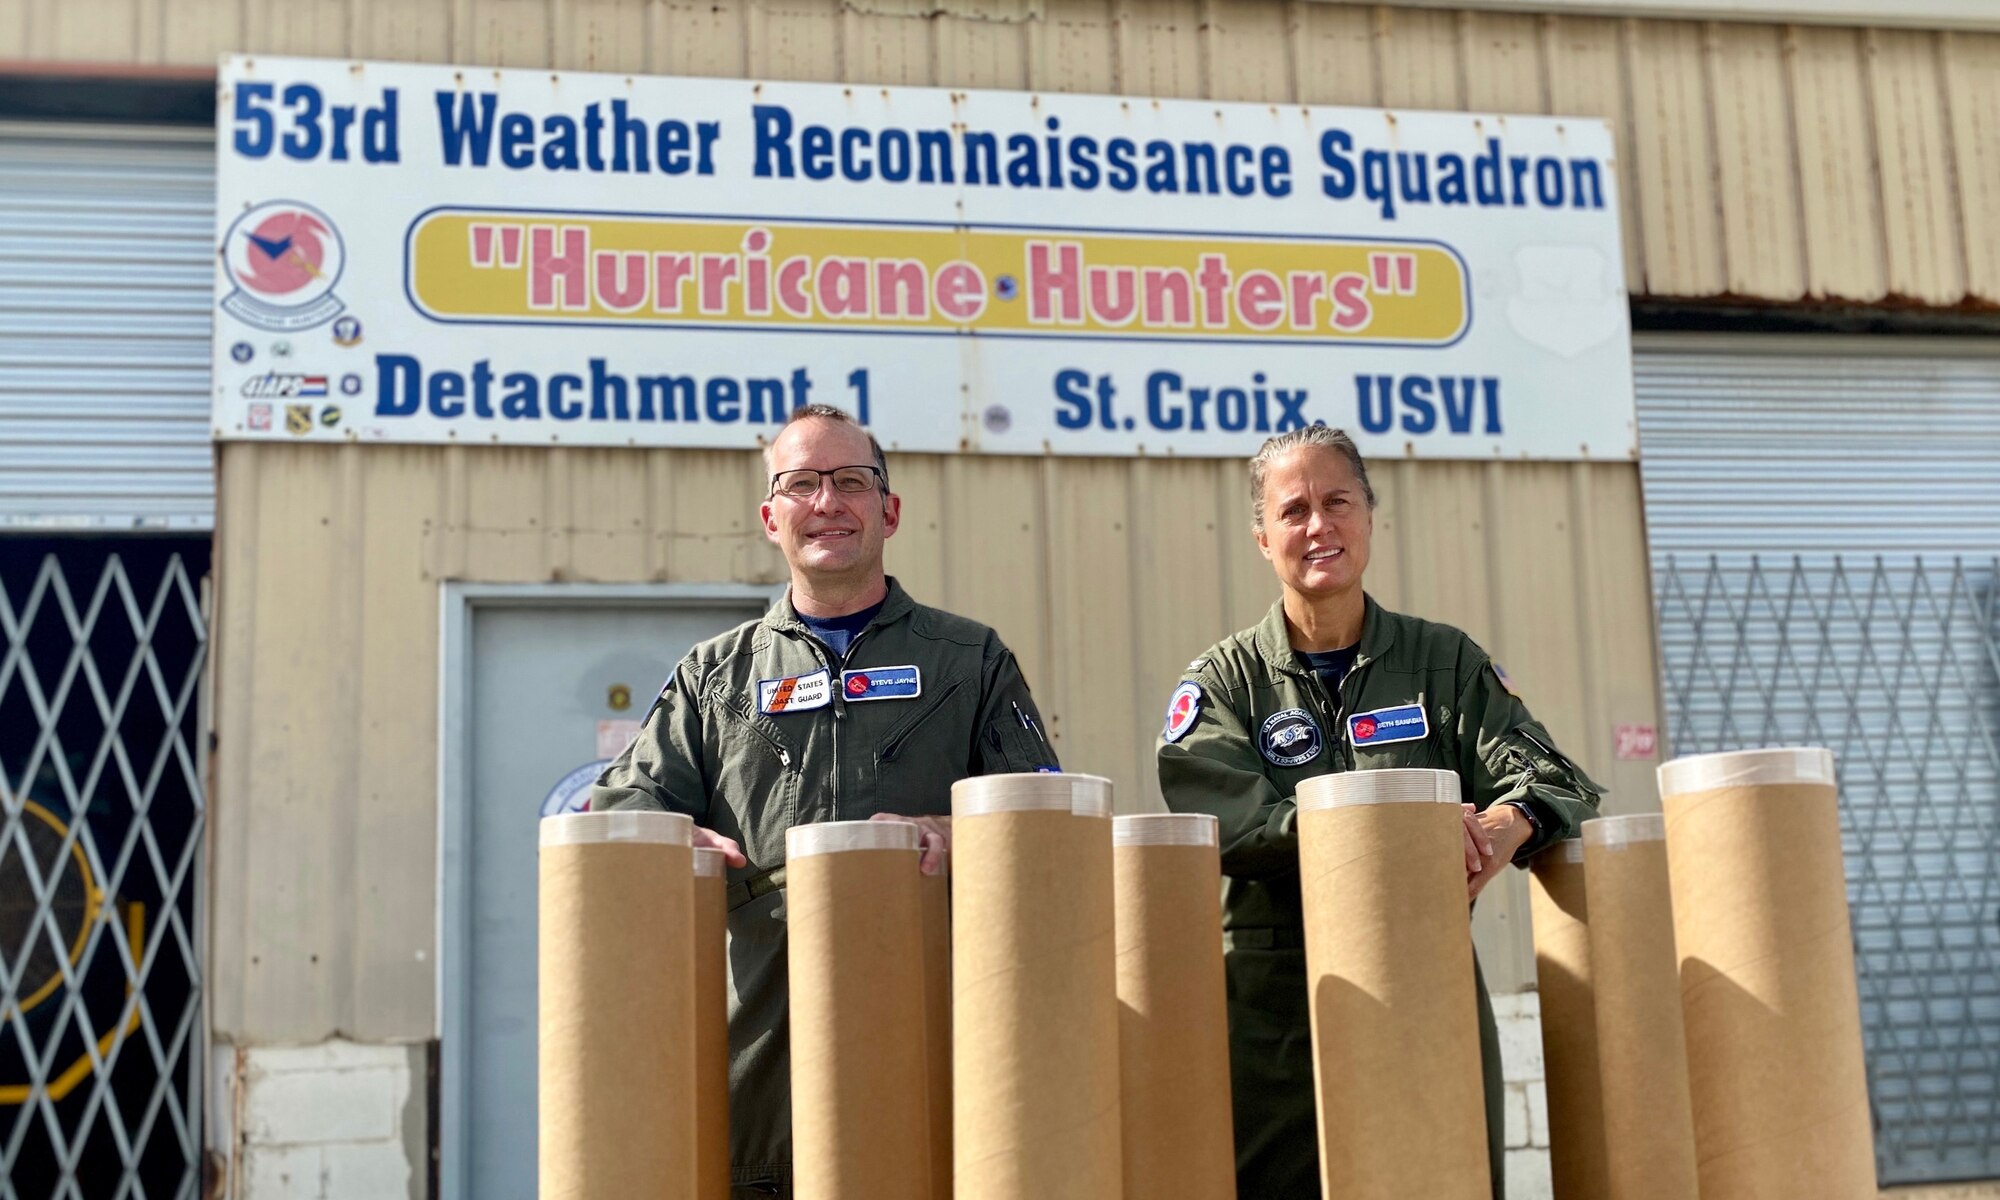 Senior Chief Jayne and Navy Capt. Sanabia pose in front of a sign that says "53rd Weather Reconnaissance Squadron Hurricane Hunters, Detachment 1, St Croix, USVI"